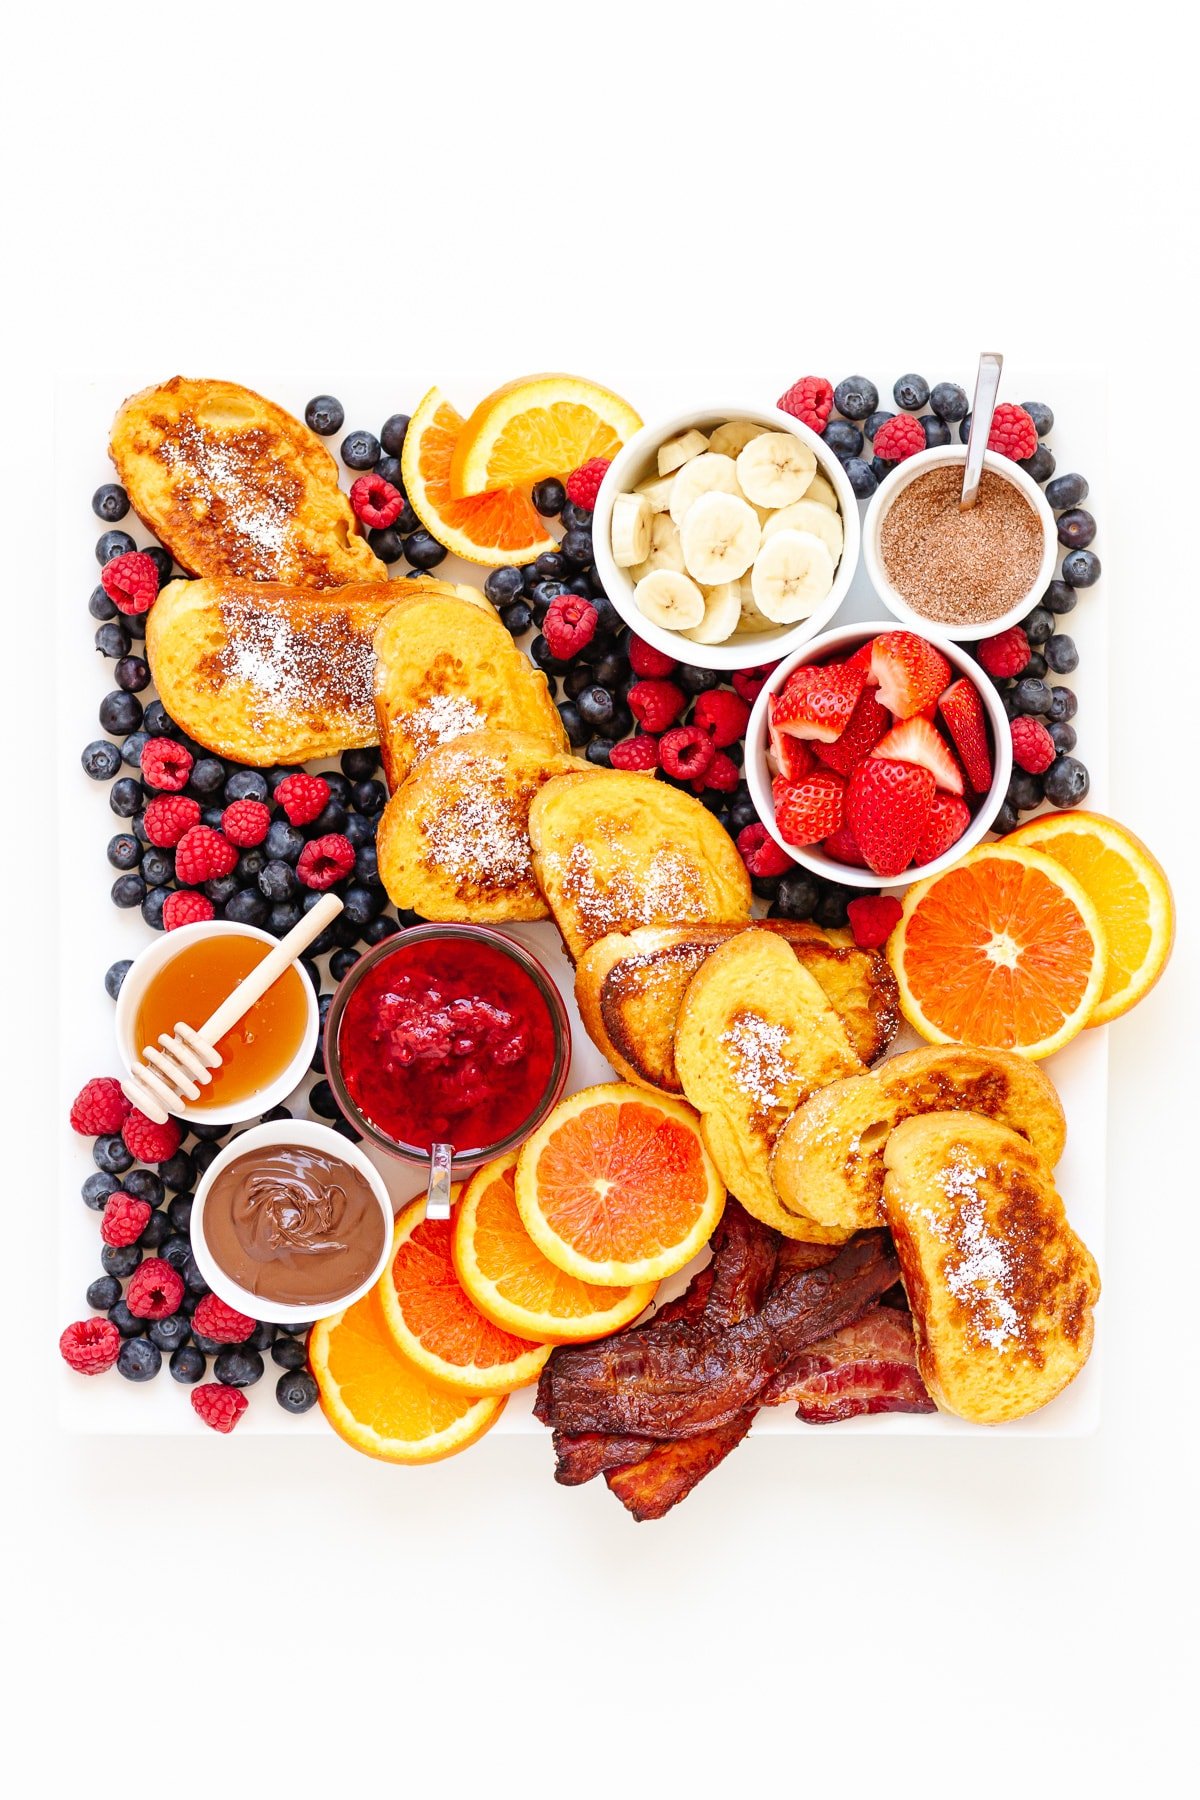 French toast breakfast platter on a white background.